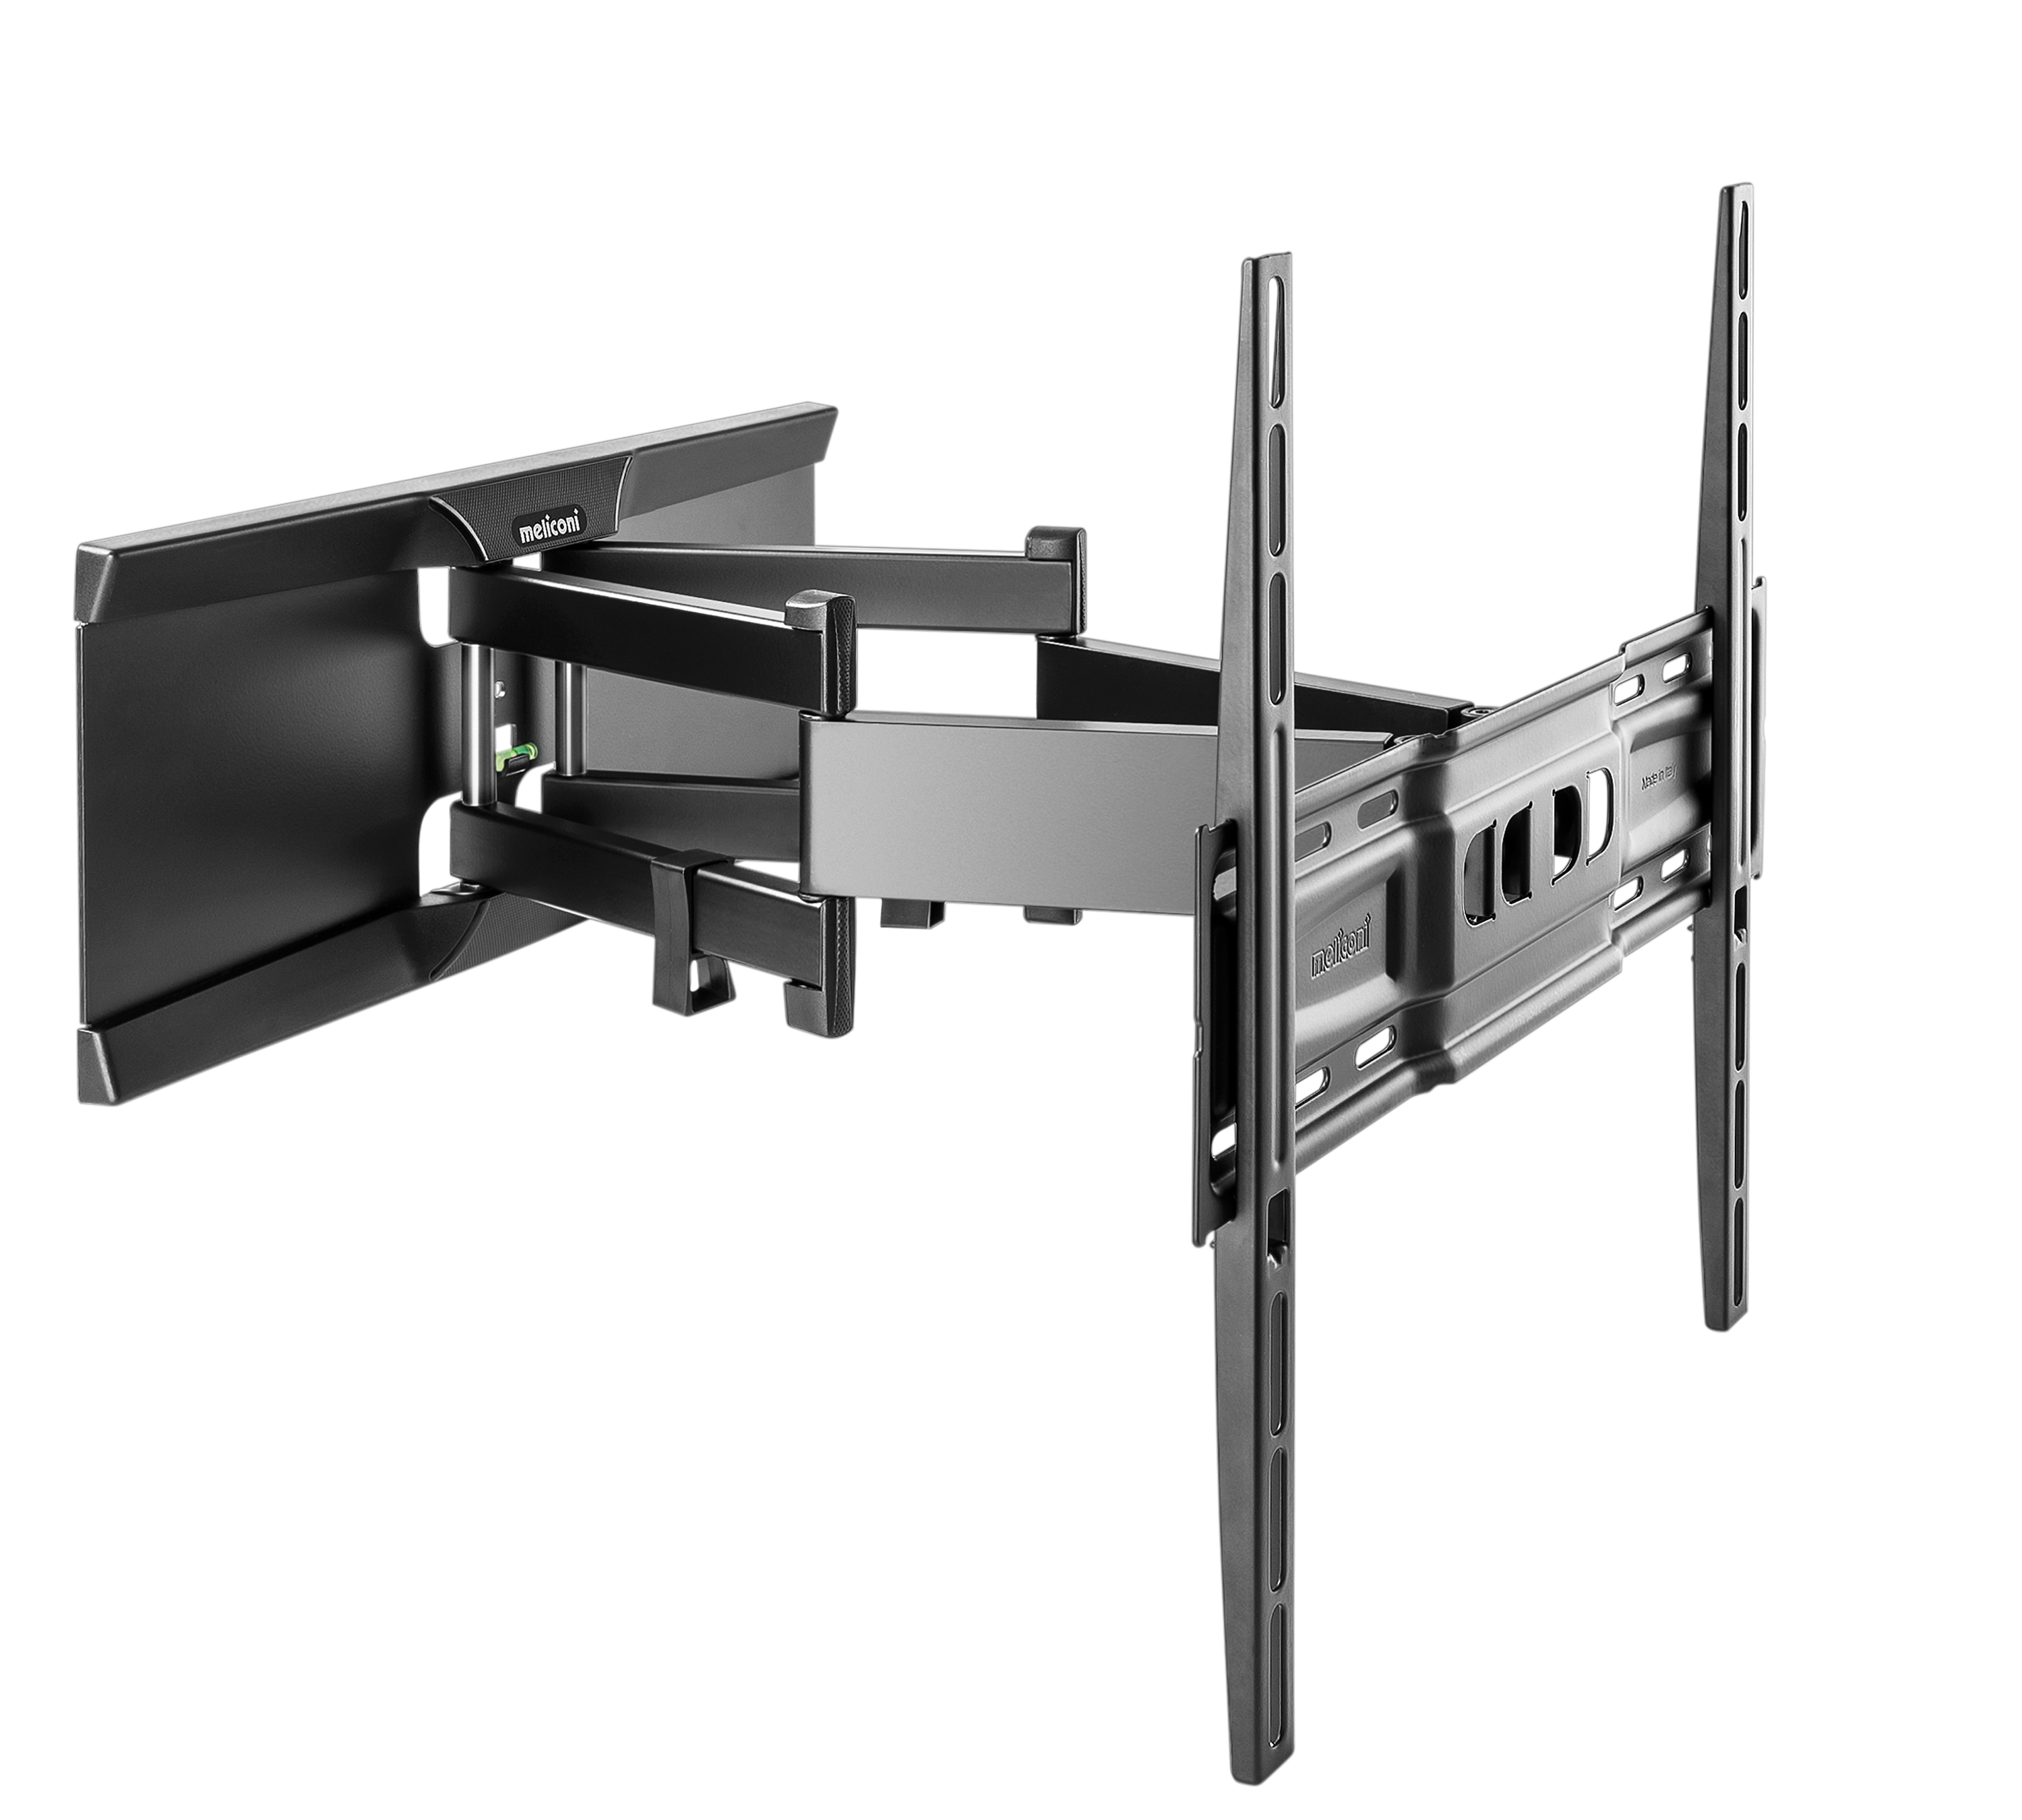 Slimstyle 400 SDRP, wall bracket rotatable double arm for 32-65 inch tv, bl